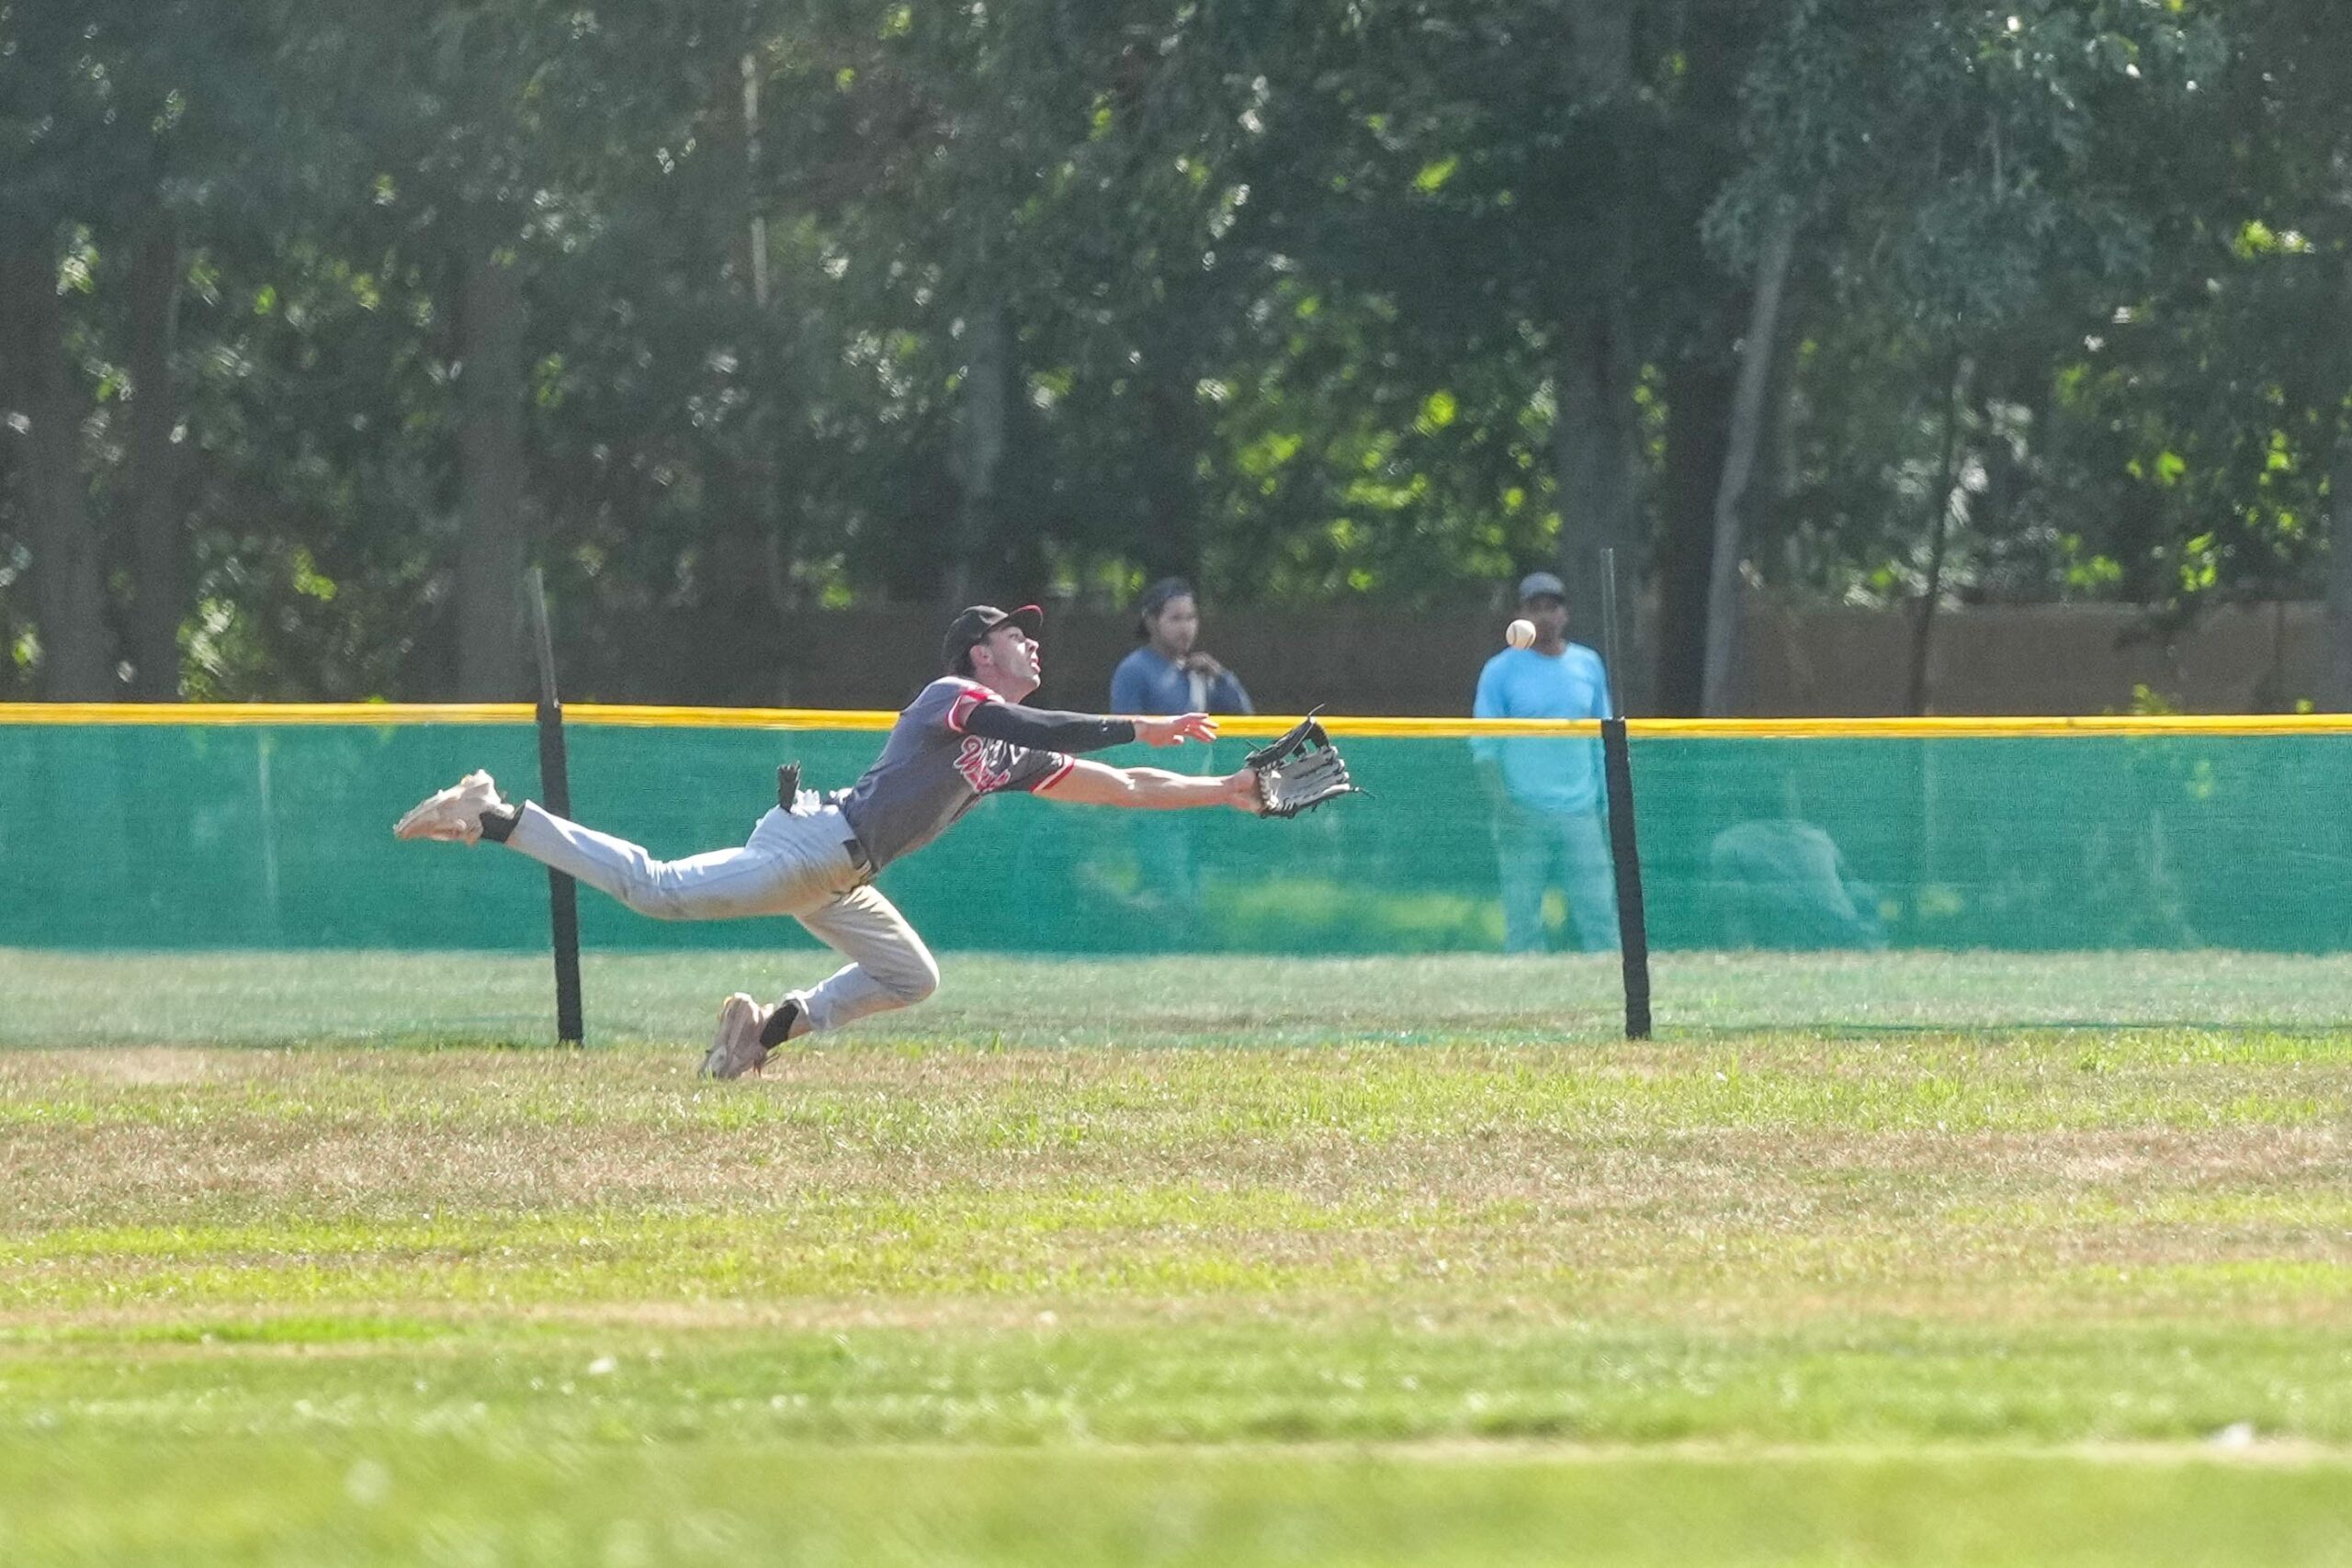 Aviator Alex Ungar (Brookdale) makes a diving play in center field early in the game.    RON ESPOSITO